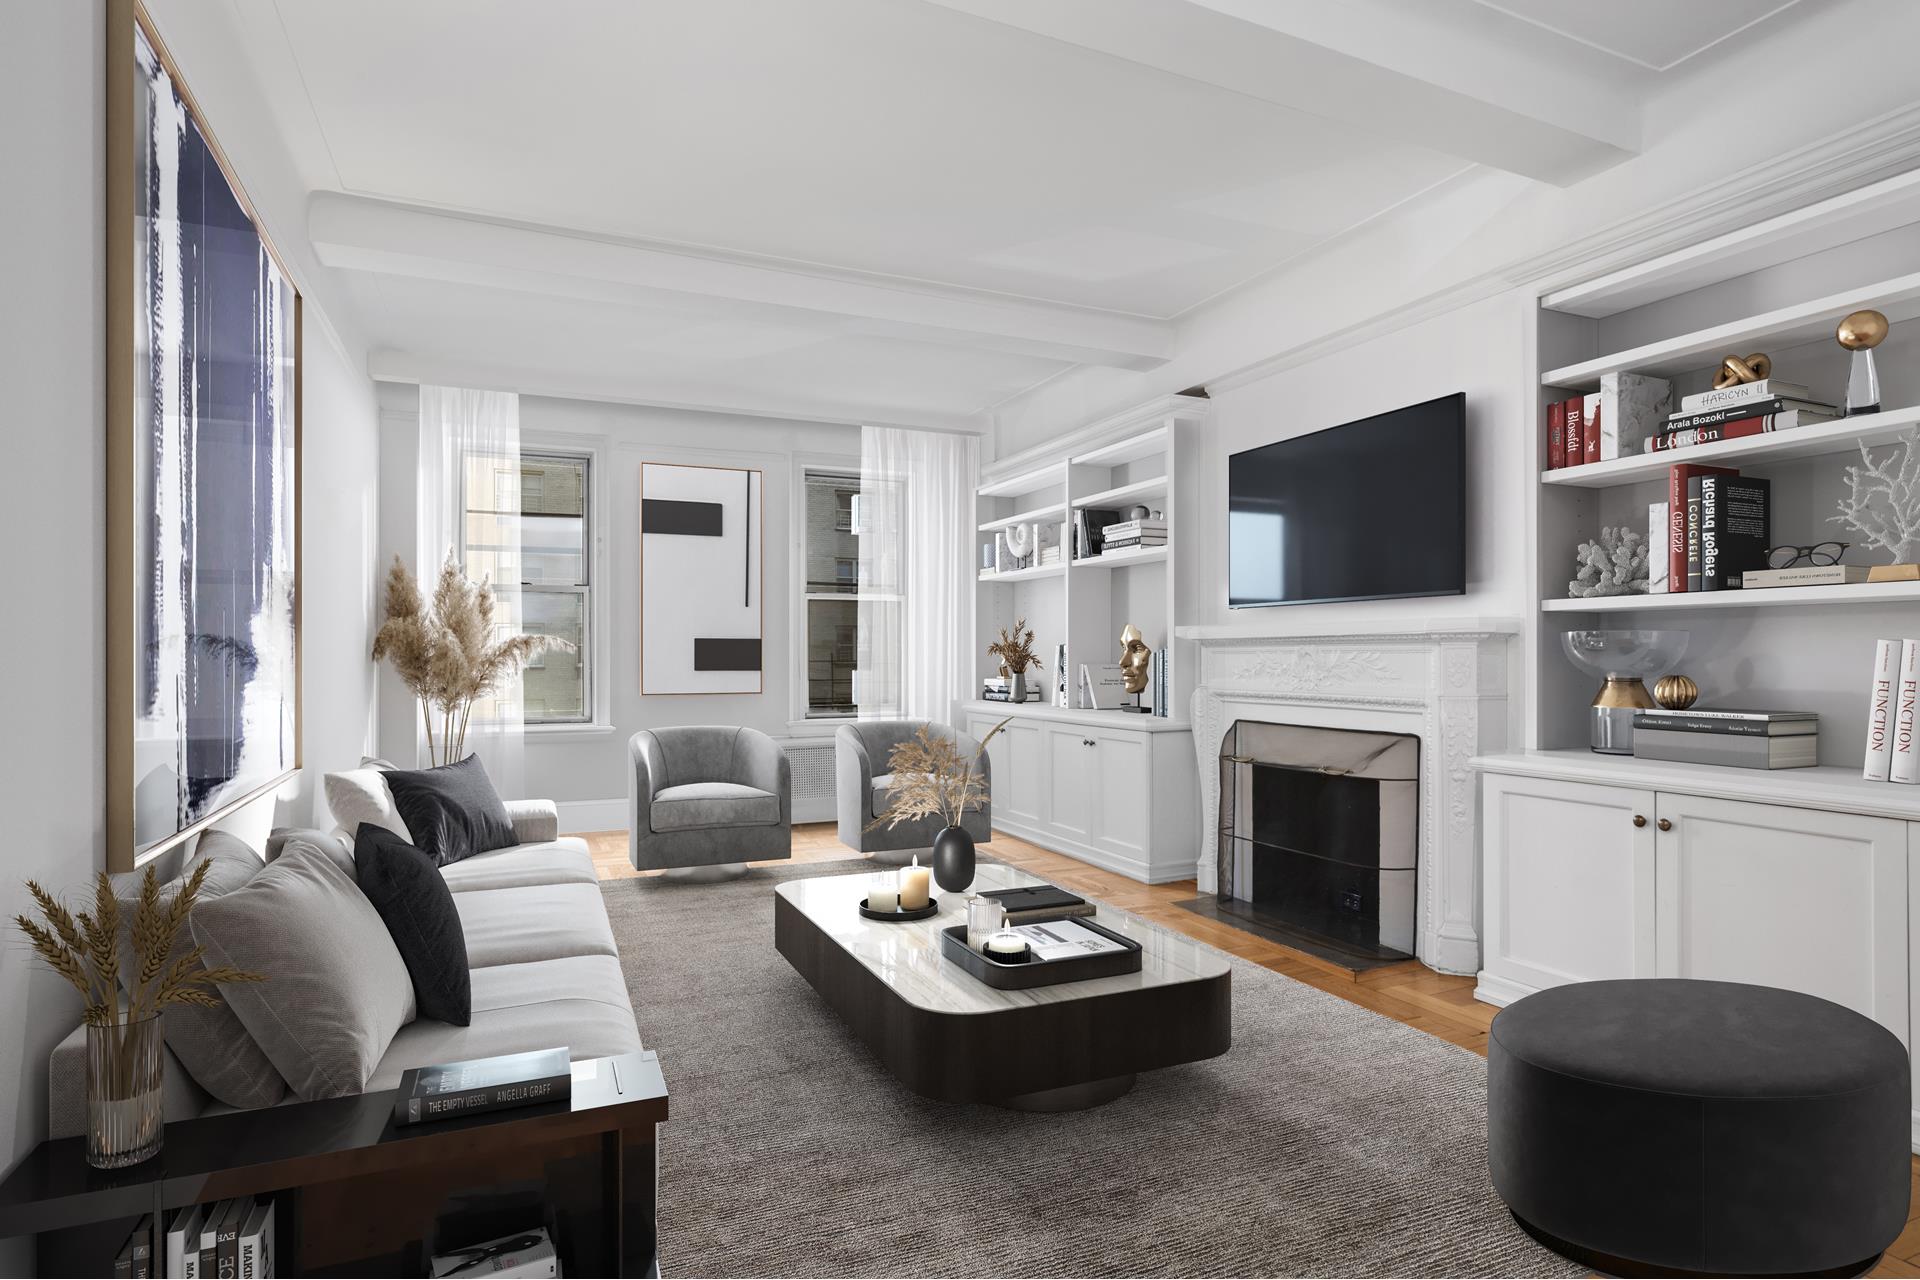 1235 Park Avenue 2A, Carnegie Hill, Upper East Side, NYC - 3 Bedrooms  
2 Bathrooms  
5 Rooms - 